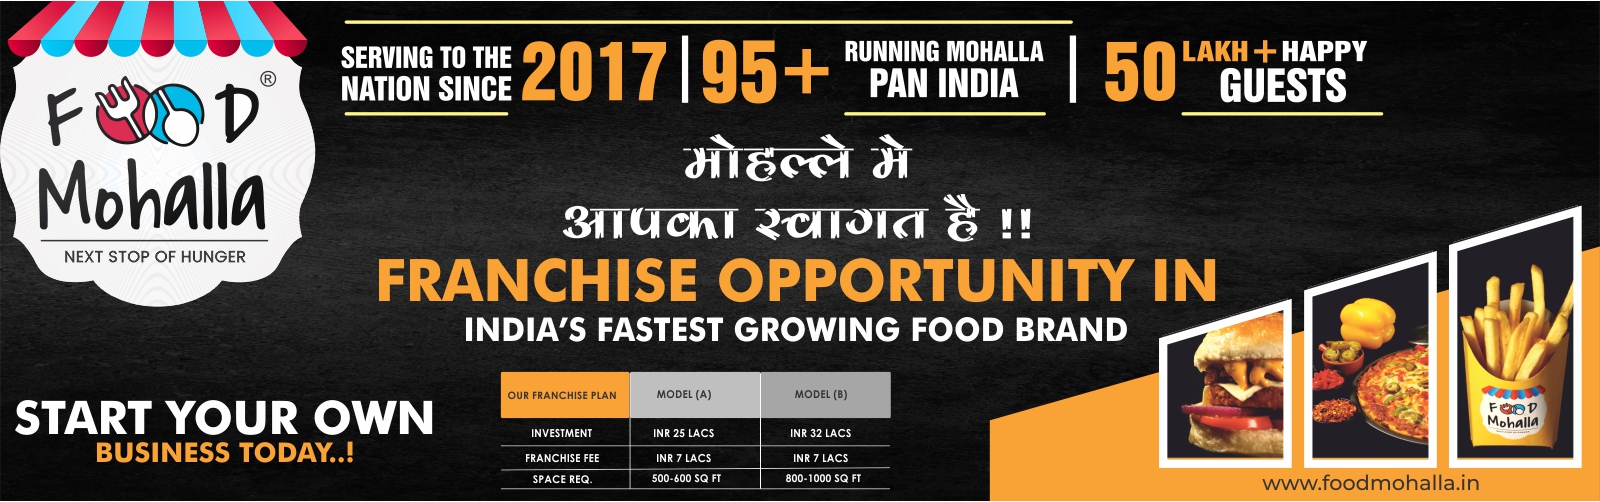 admin/uploads/brand_registration/Food Mohalla (Franchise Opportunity in India Fastest Growing Food Brand)